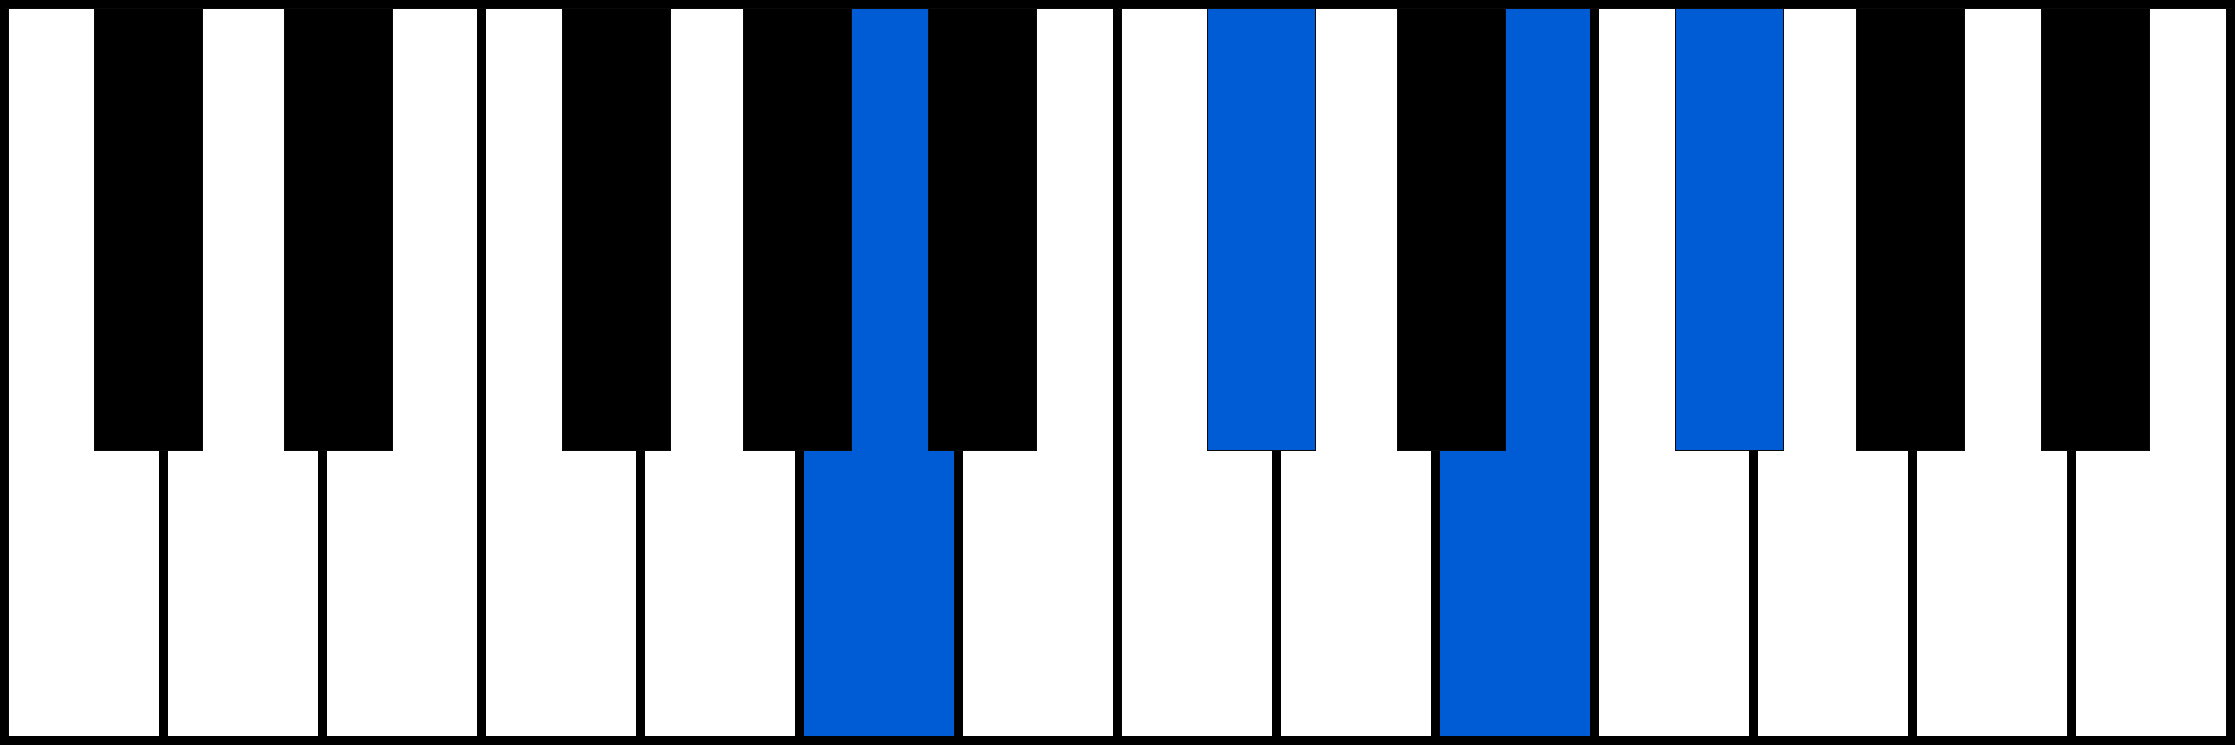 A6 piano chord fingering